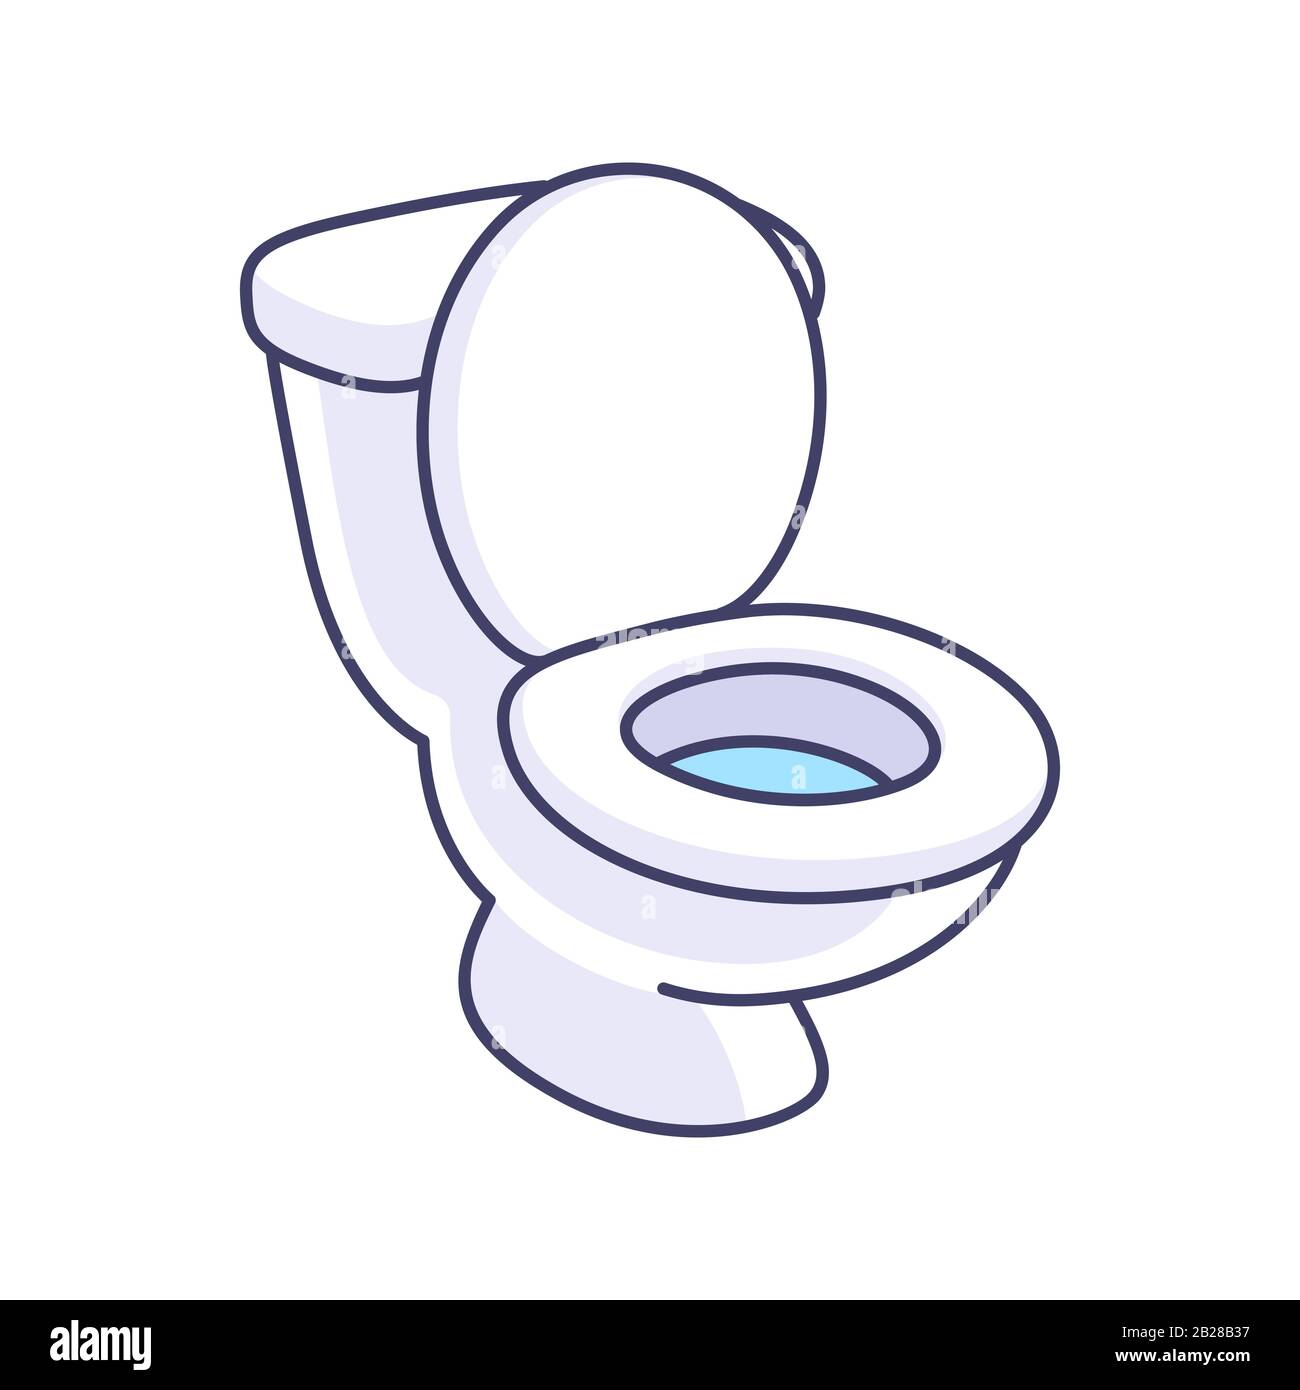 Cartoon Toilet High Resolution Stock Photography and Images - Alamy